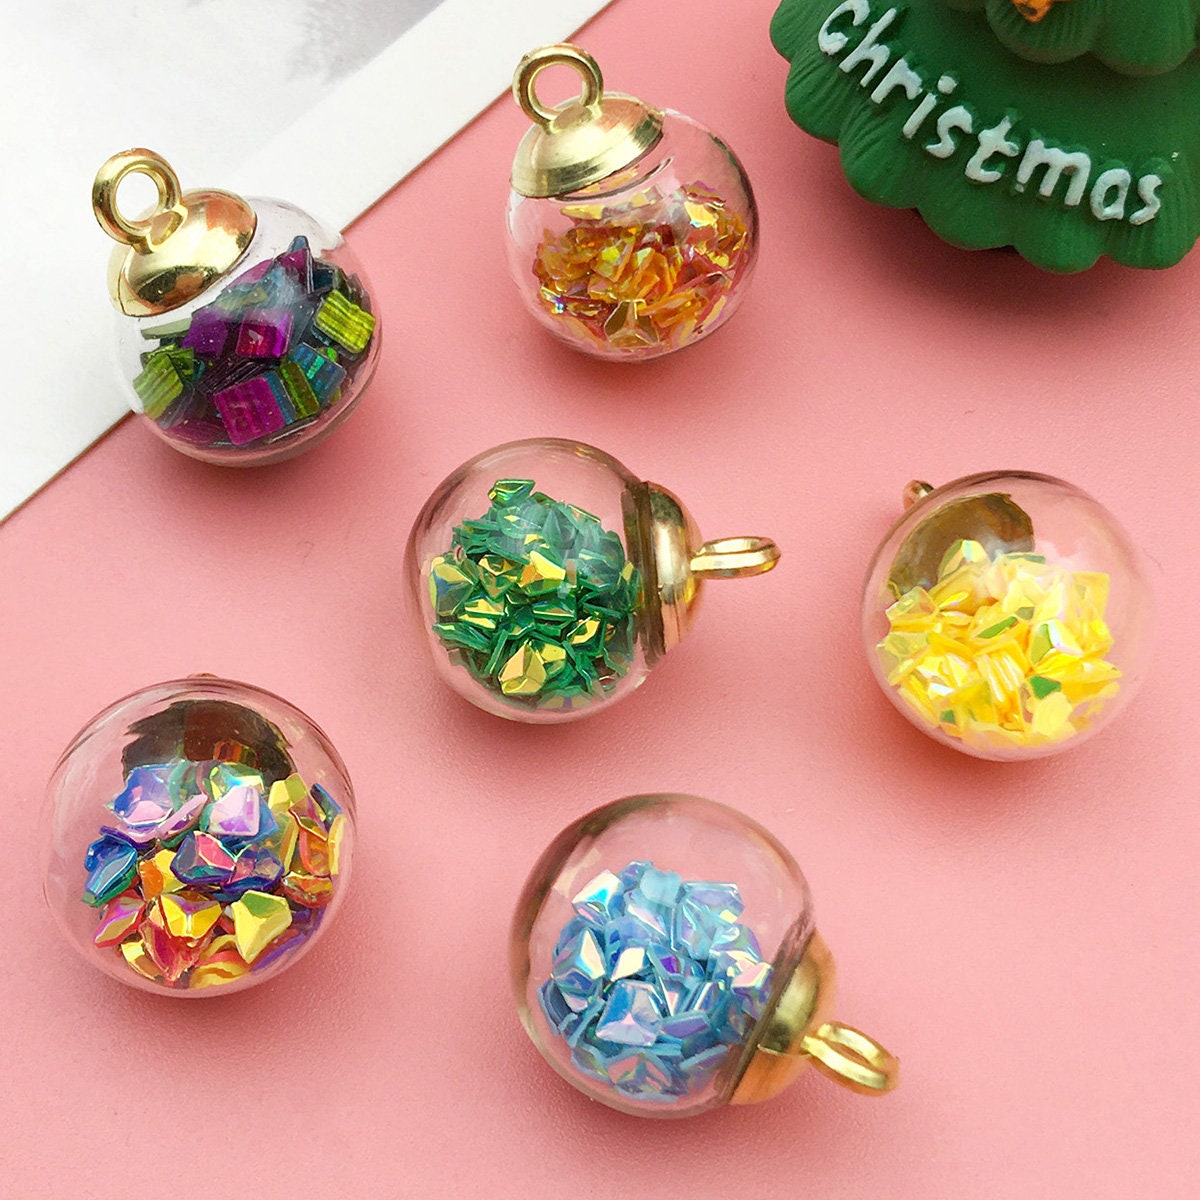 15pcs Random Christmas Golden Enamel Charms DIY Jewelry Making Charms  Pendant For Bracelet Necklace Earring Craft Supplies